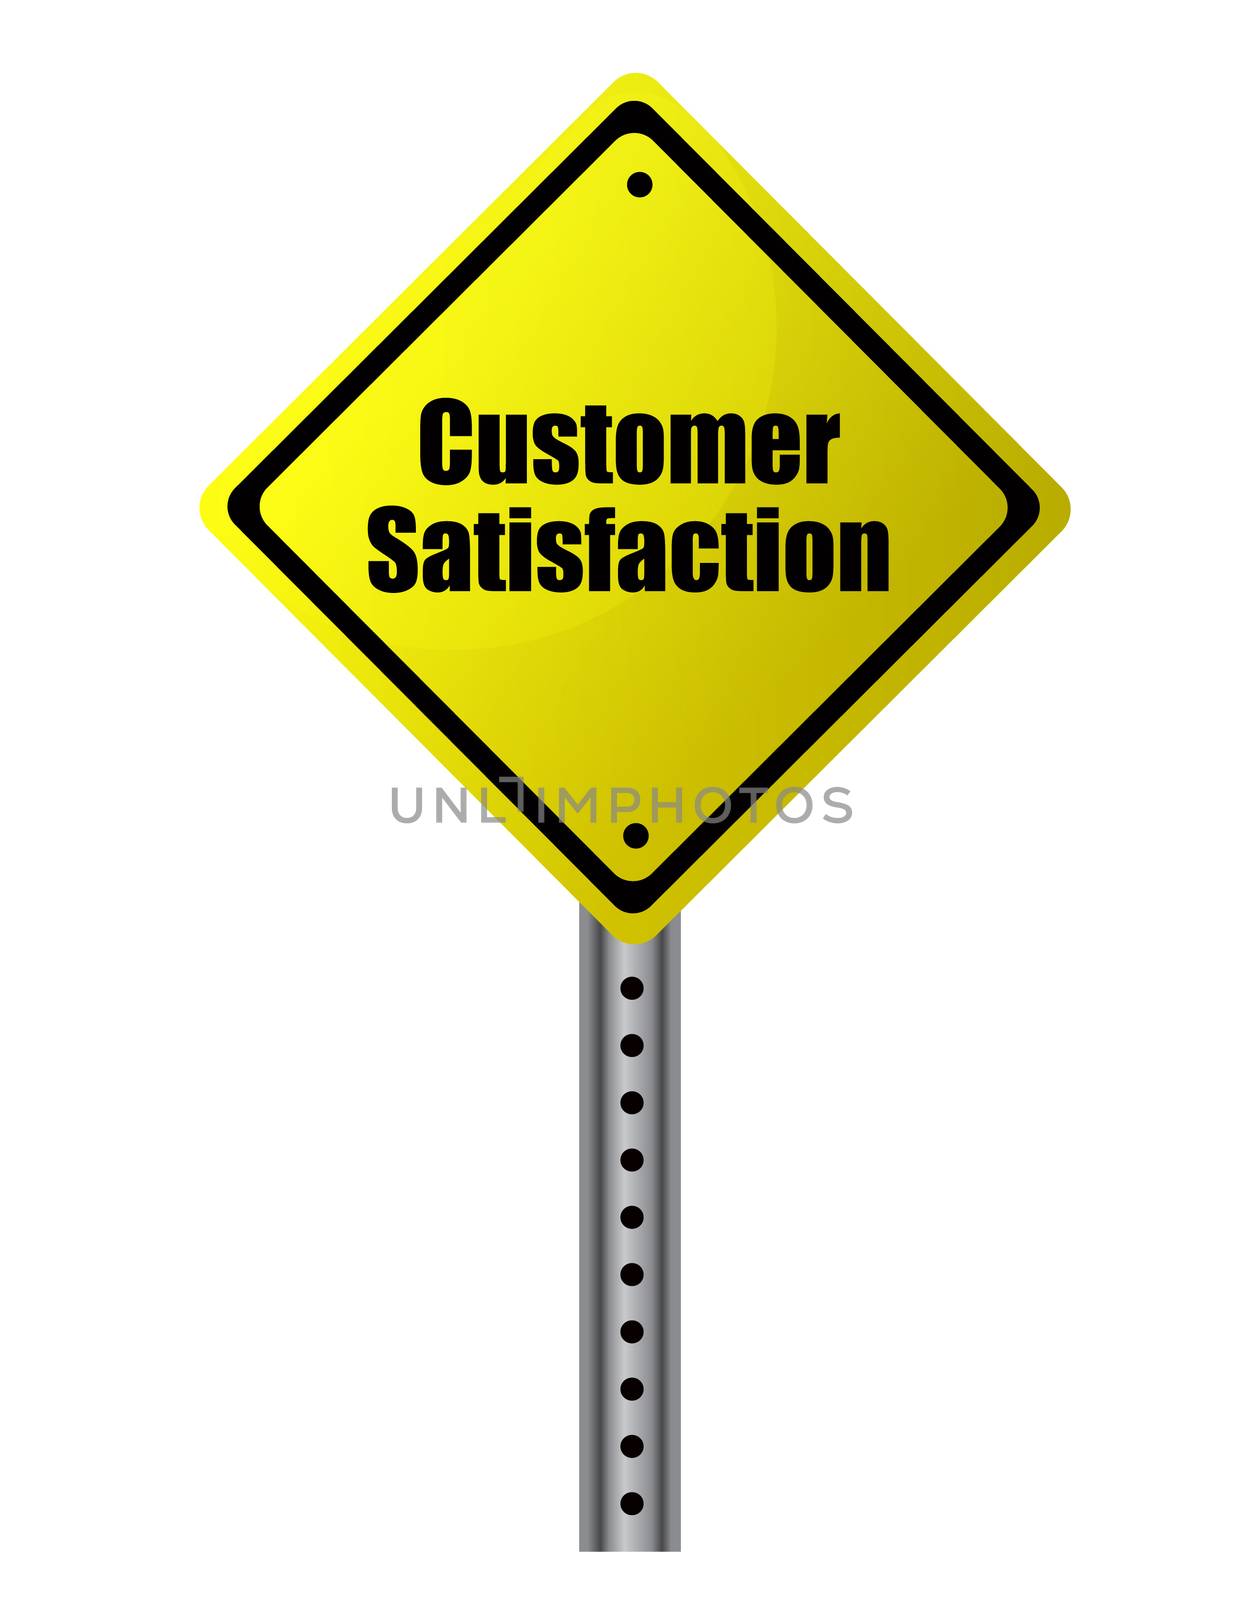 Customer satisfaction posted on a yellow sign. Vector file avail by alexmillos